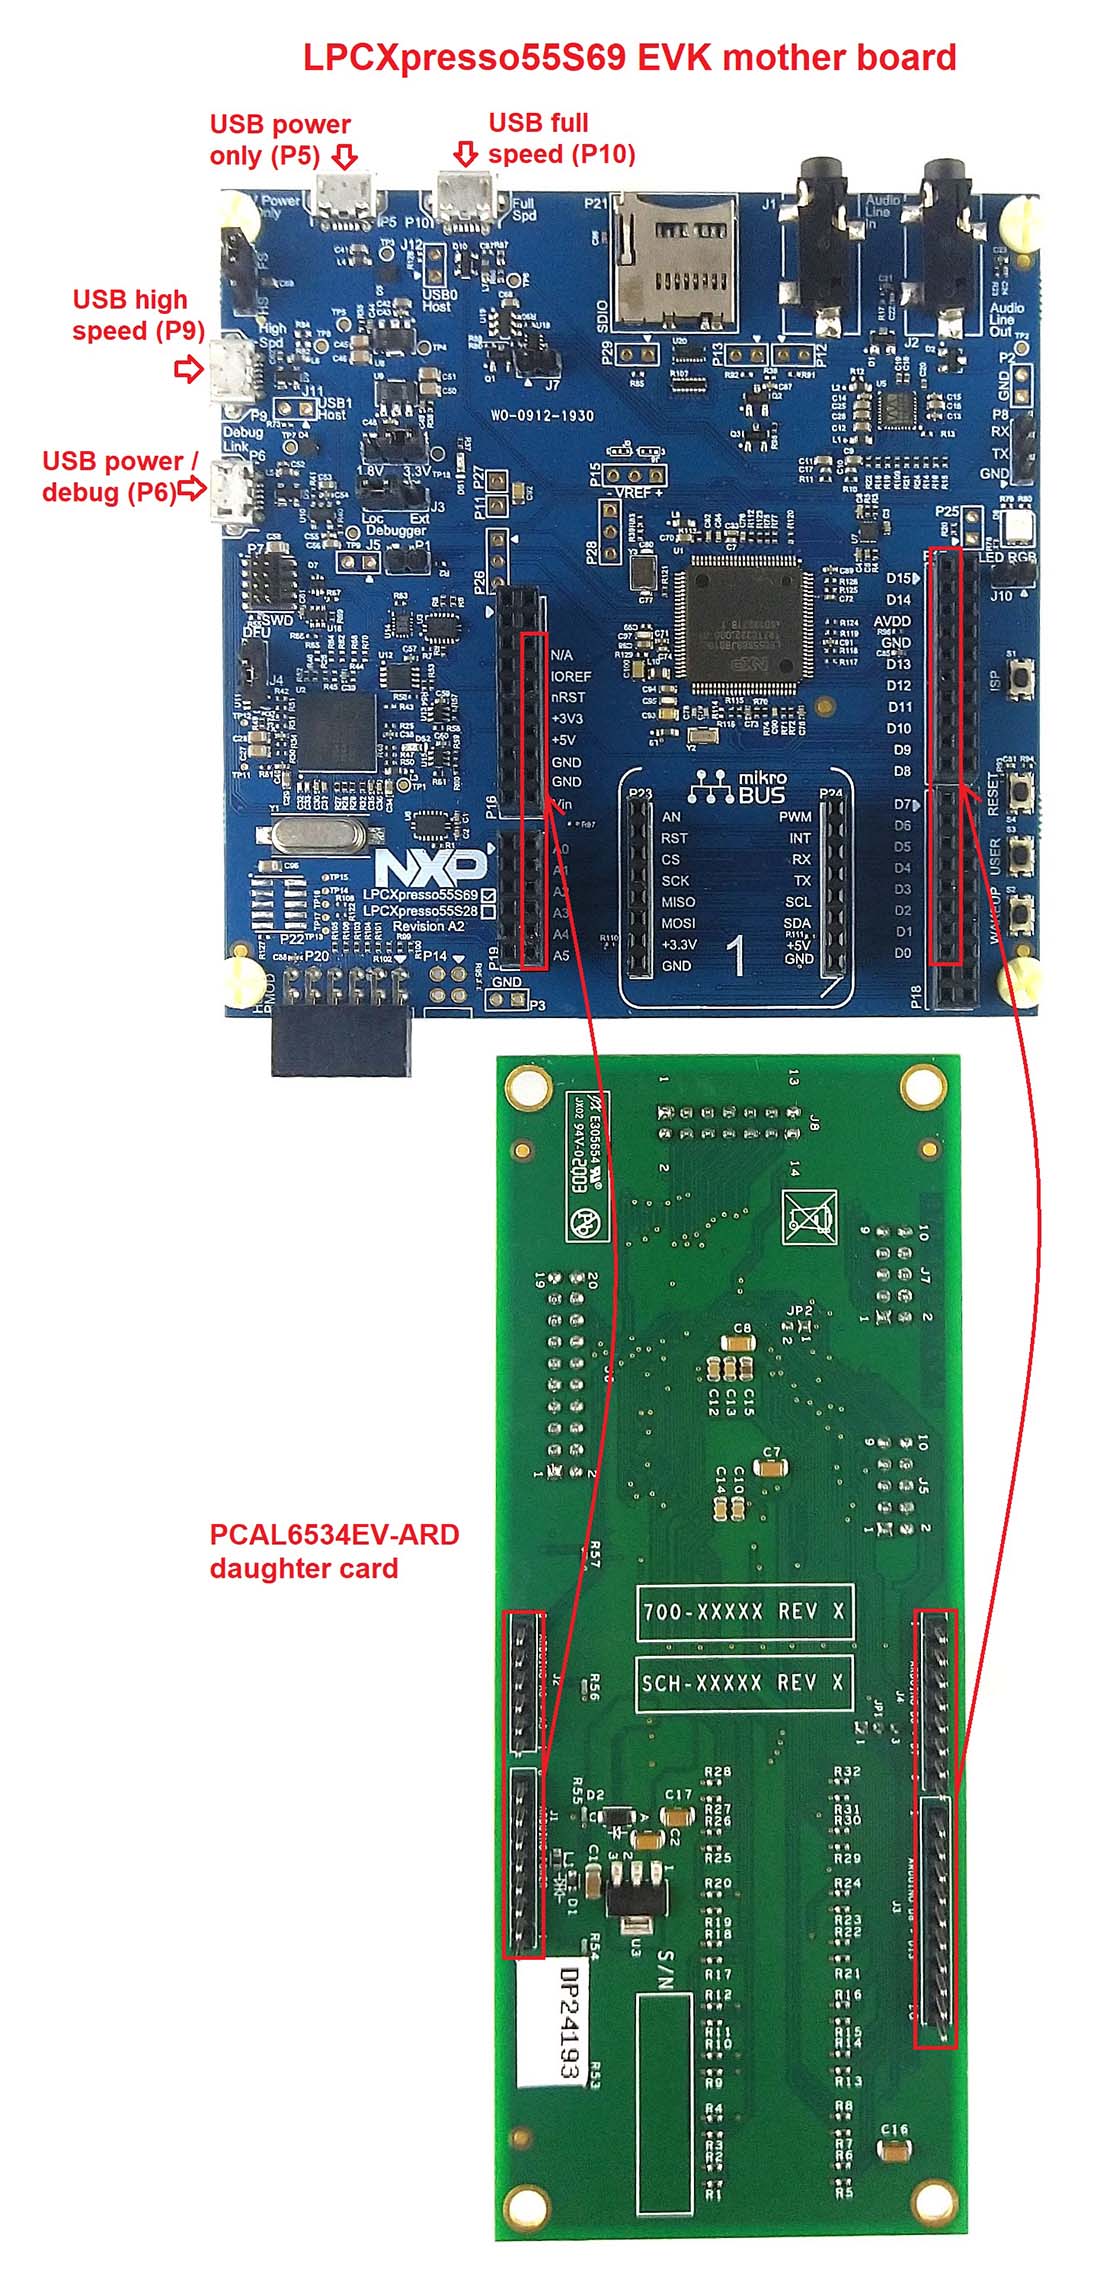 PCAL6534EV-ARD daughter board and LPCXpresso55S69 mother board, before starting